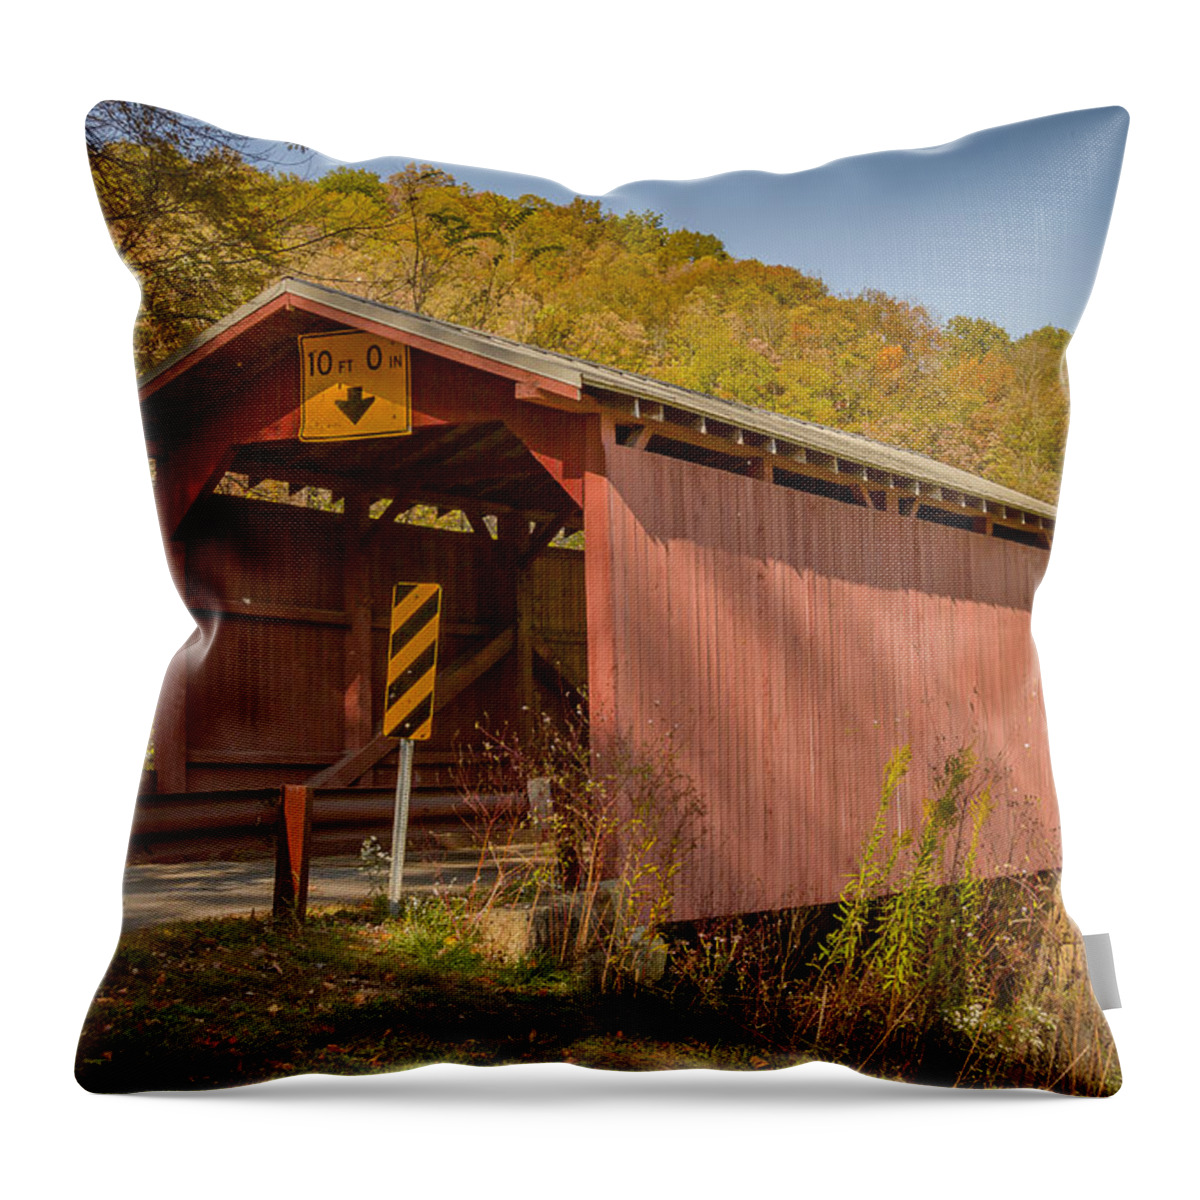 America Throw Pillow featuring the photograph Hundred or Fish Creek Covered Bridge by Jack R Perry